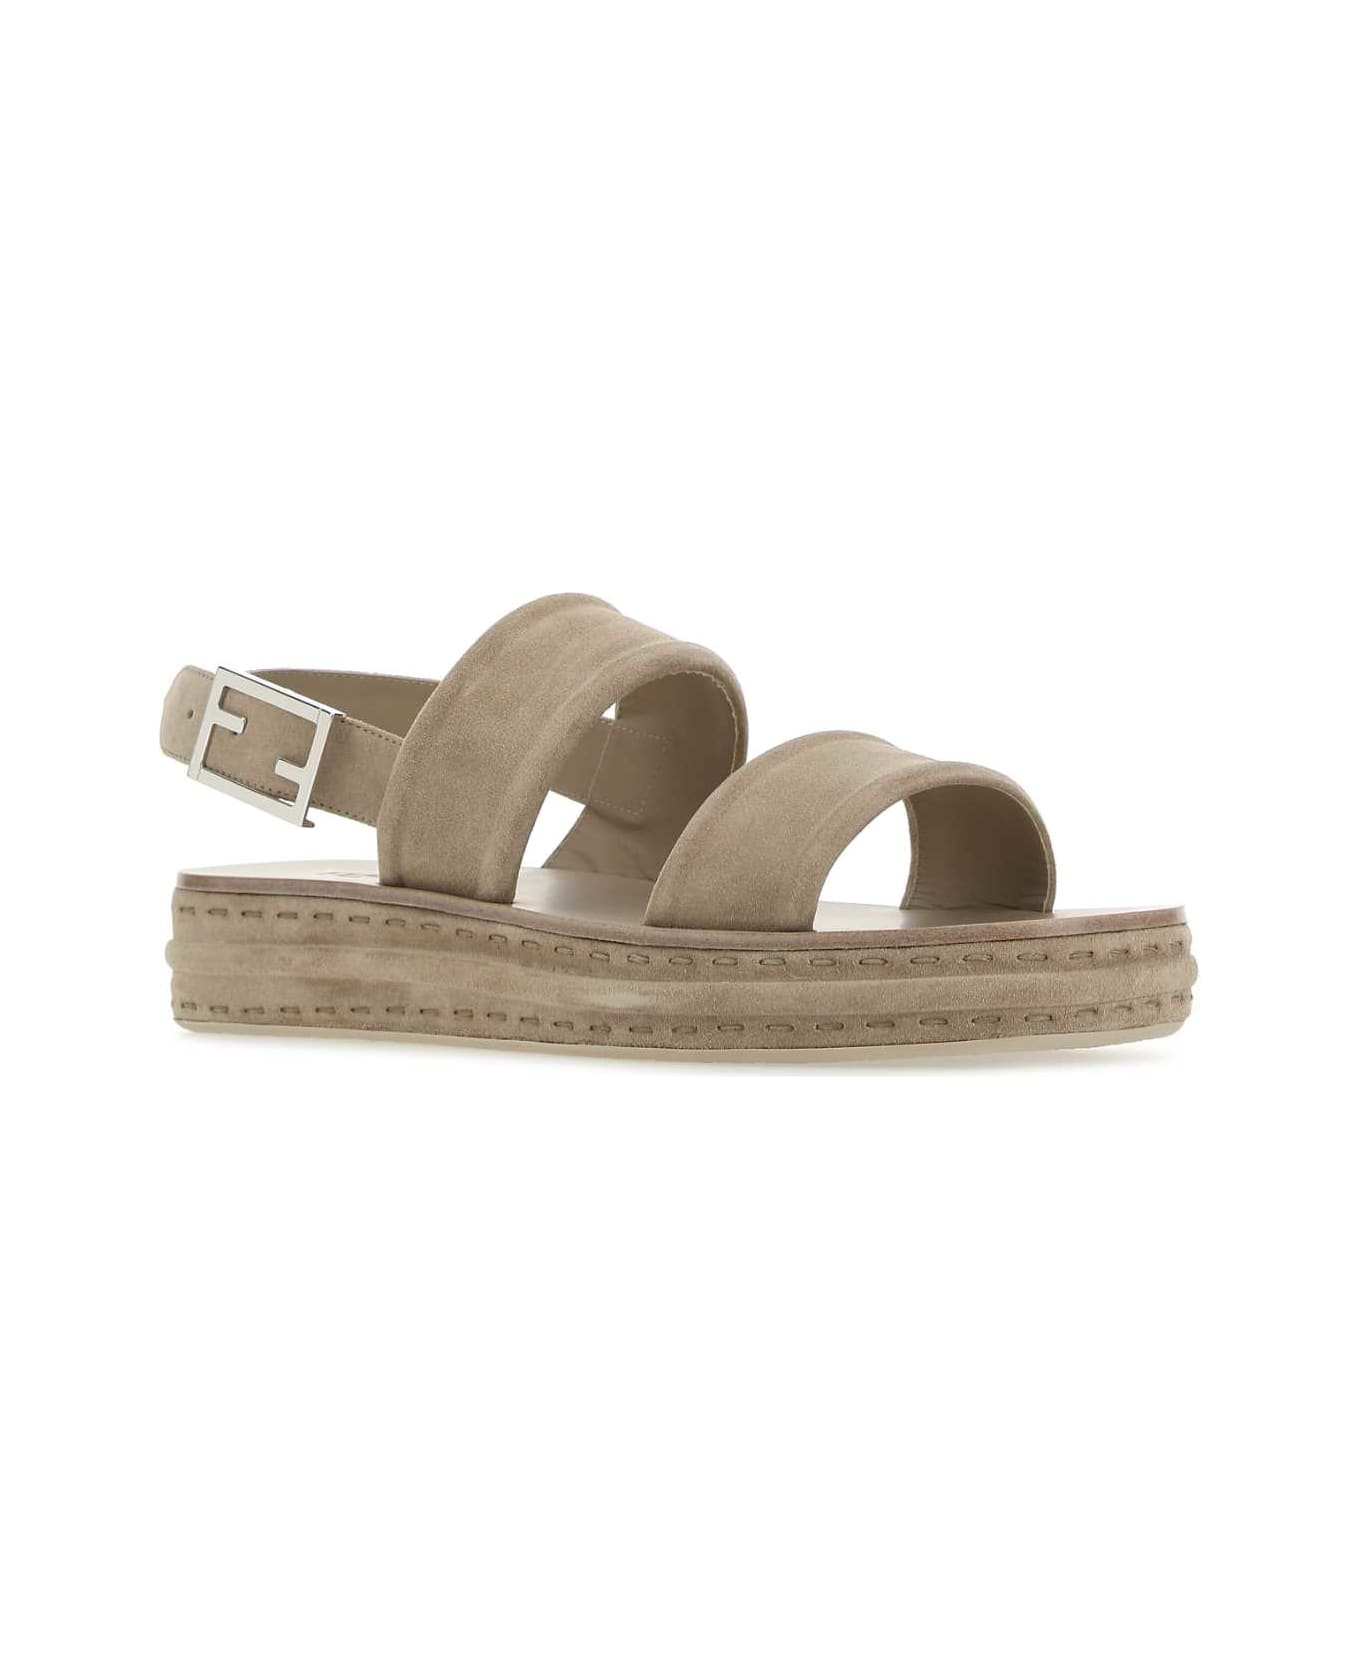 Fendi Cappuccino Suede Sandals - F0EJB その他各種シューズ